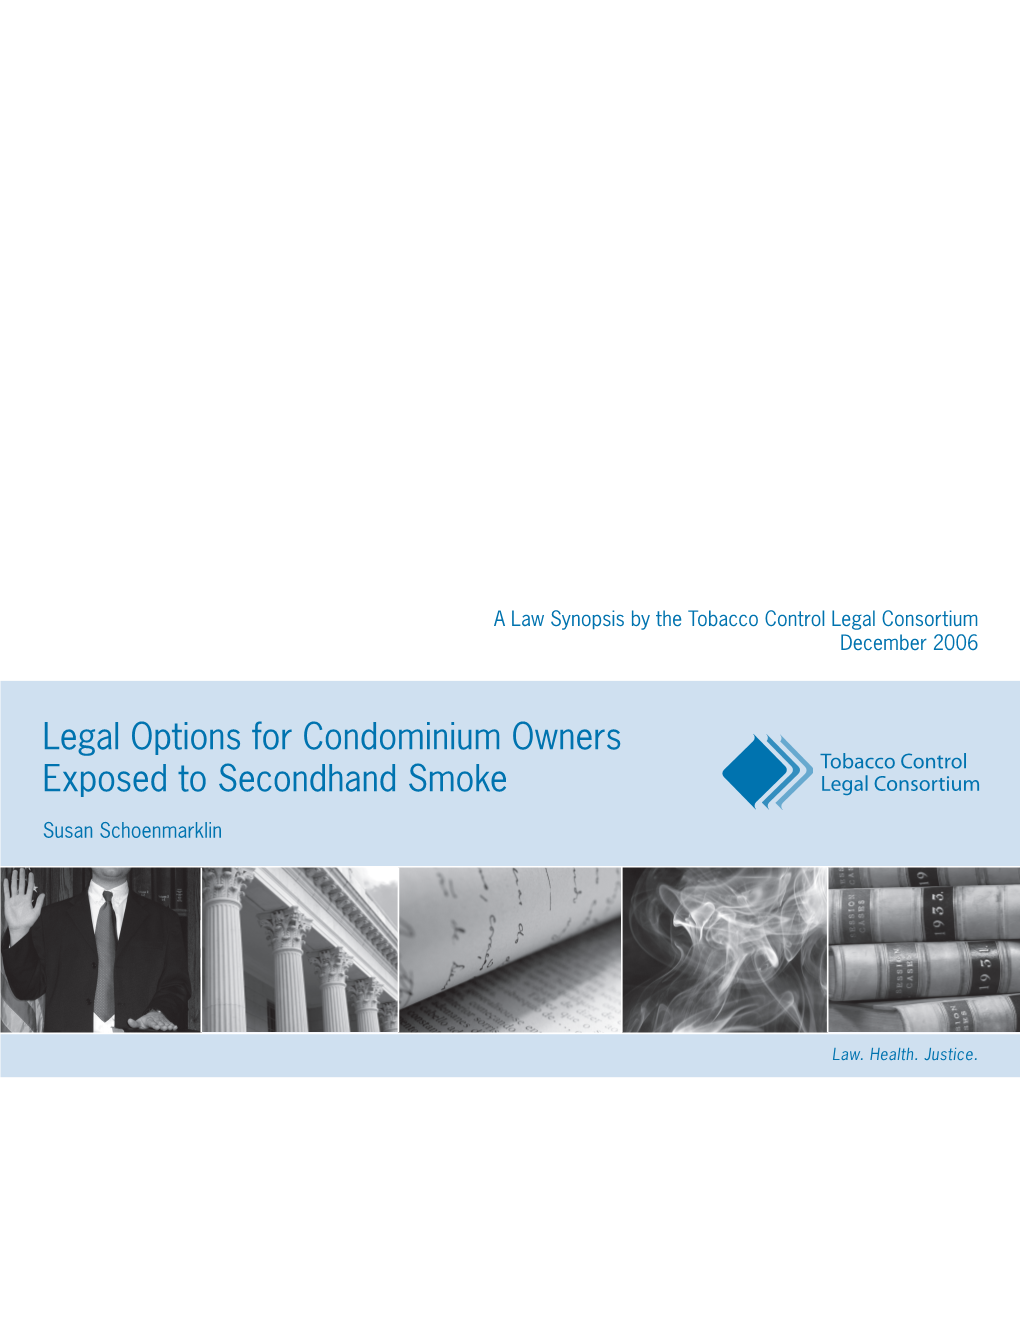 Legal Options for Condominium Owners Exposed to Secondhand Smoke (2006)